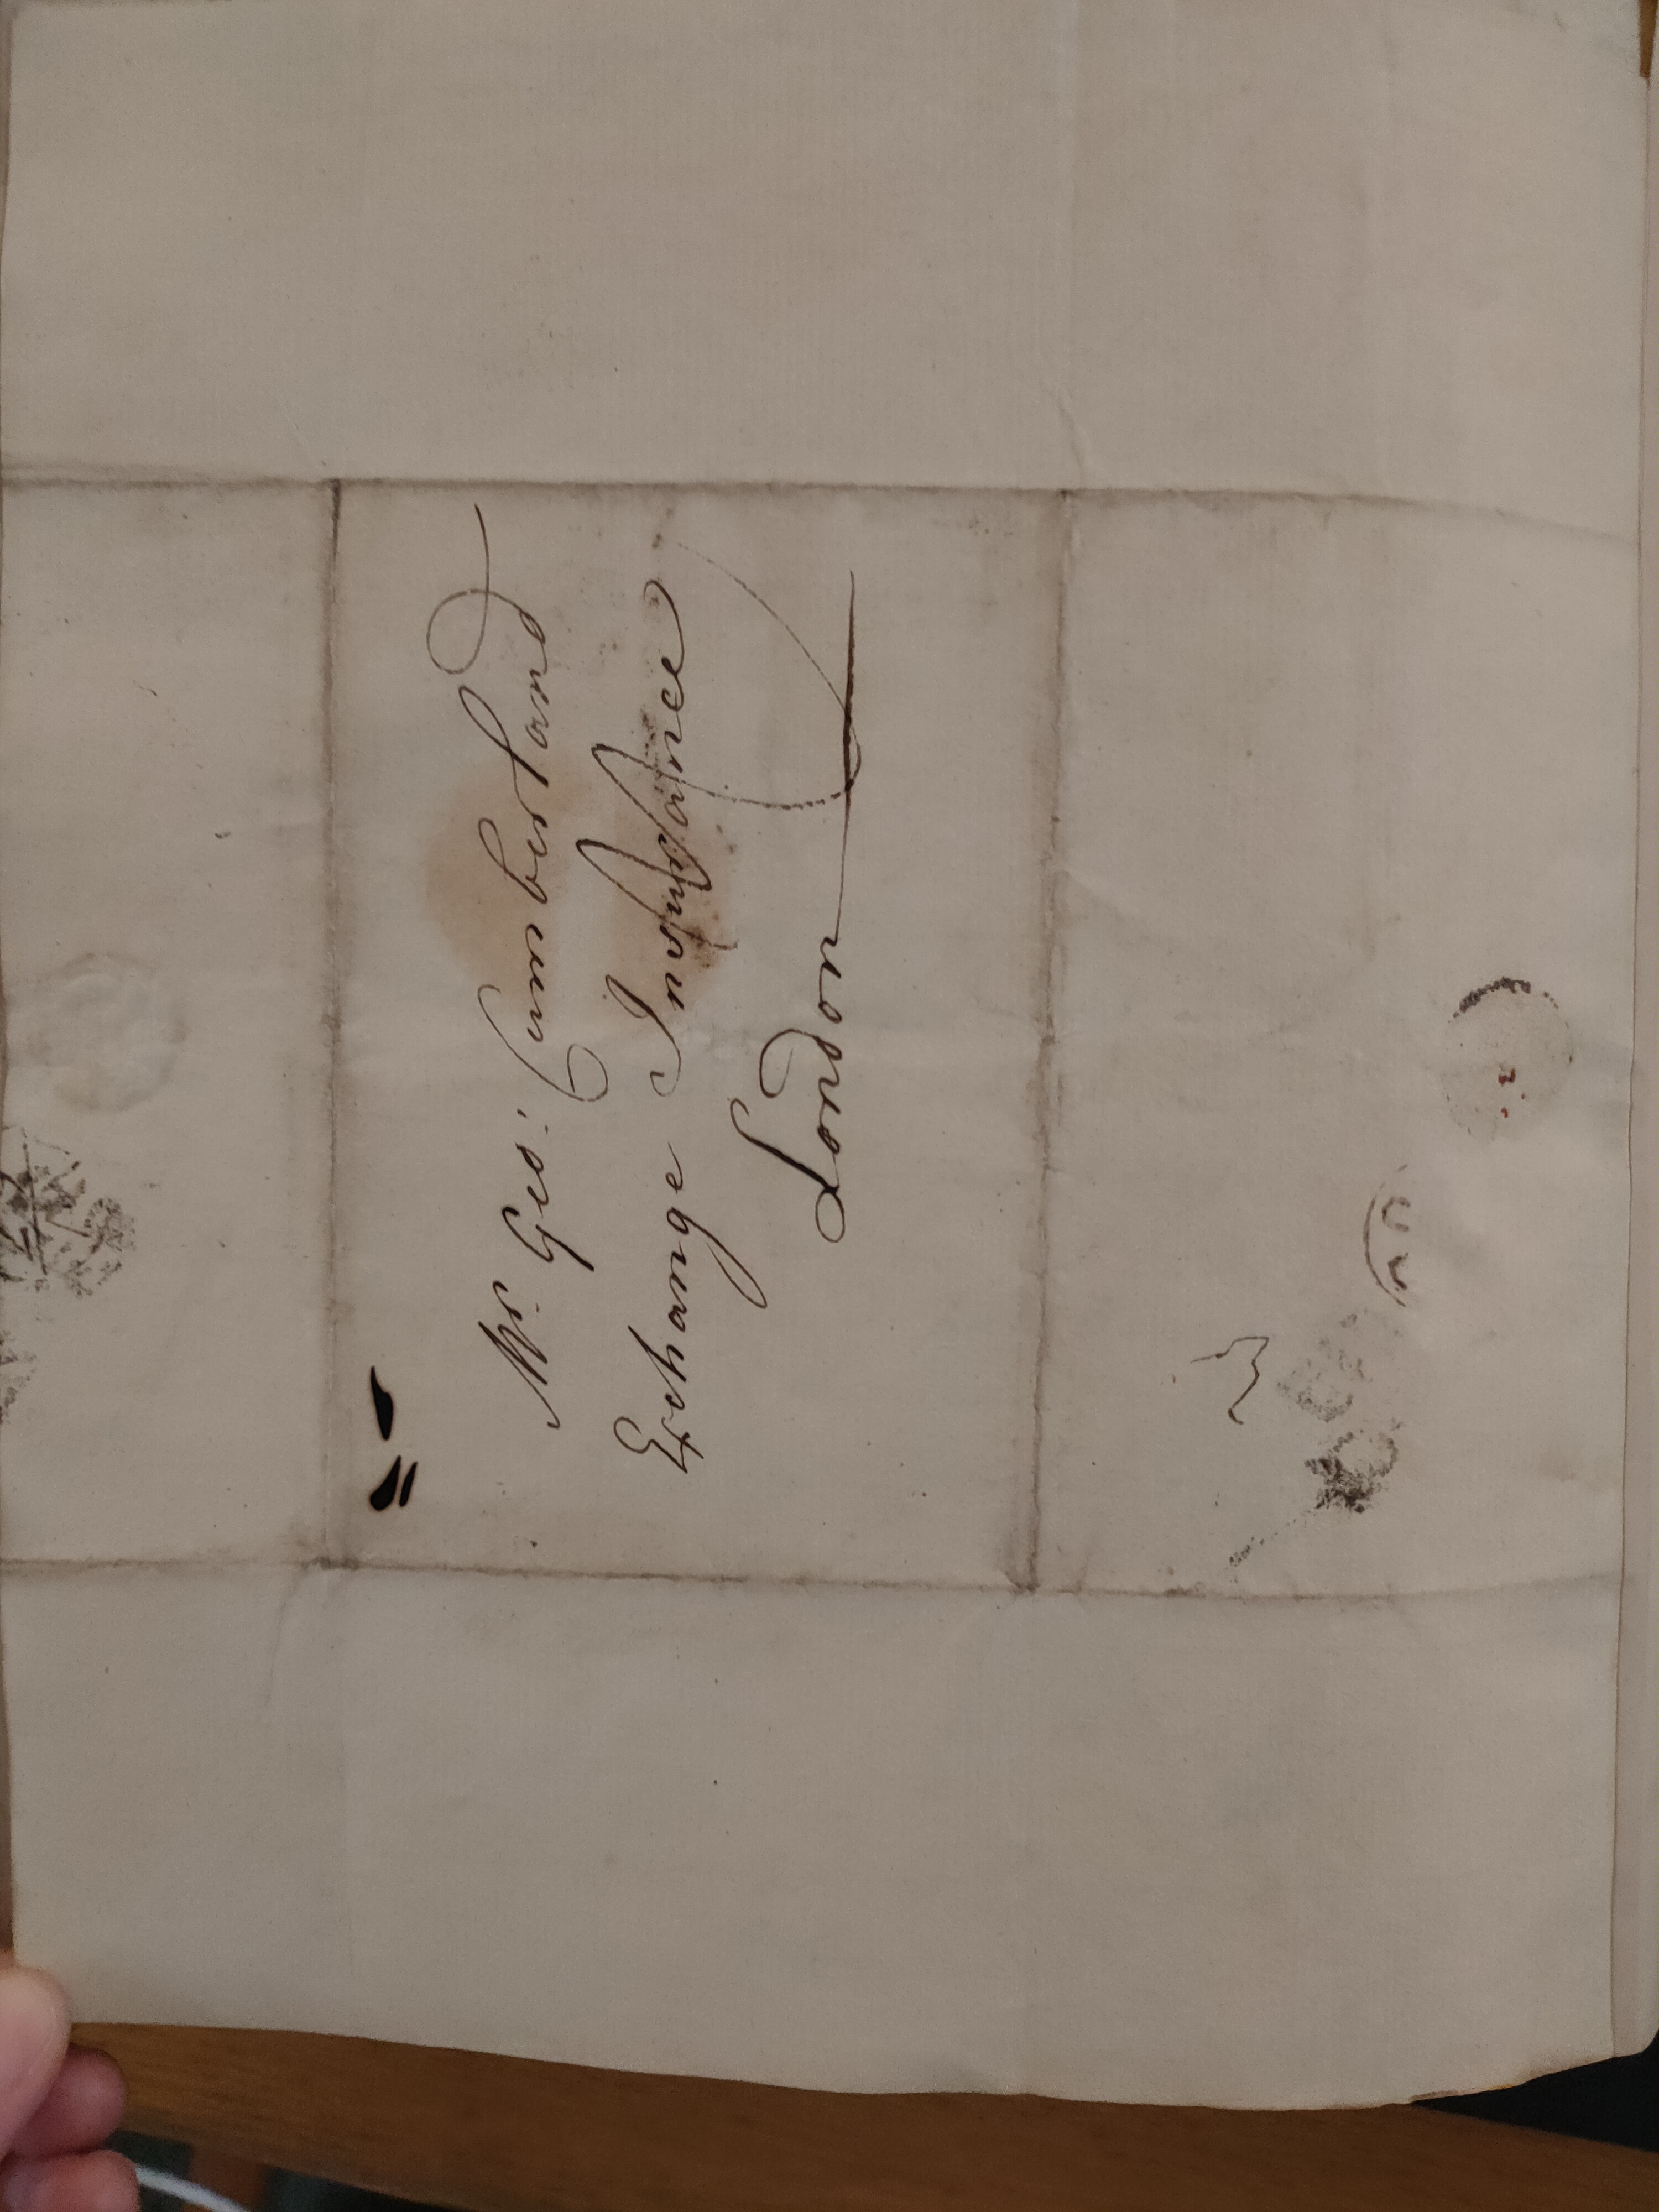 Image #3 of letter: Revd Richard Cumberland to George Cumberland, 27 August 1778